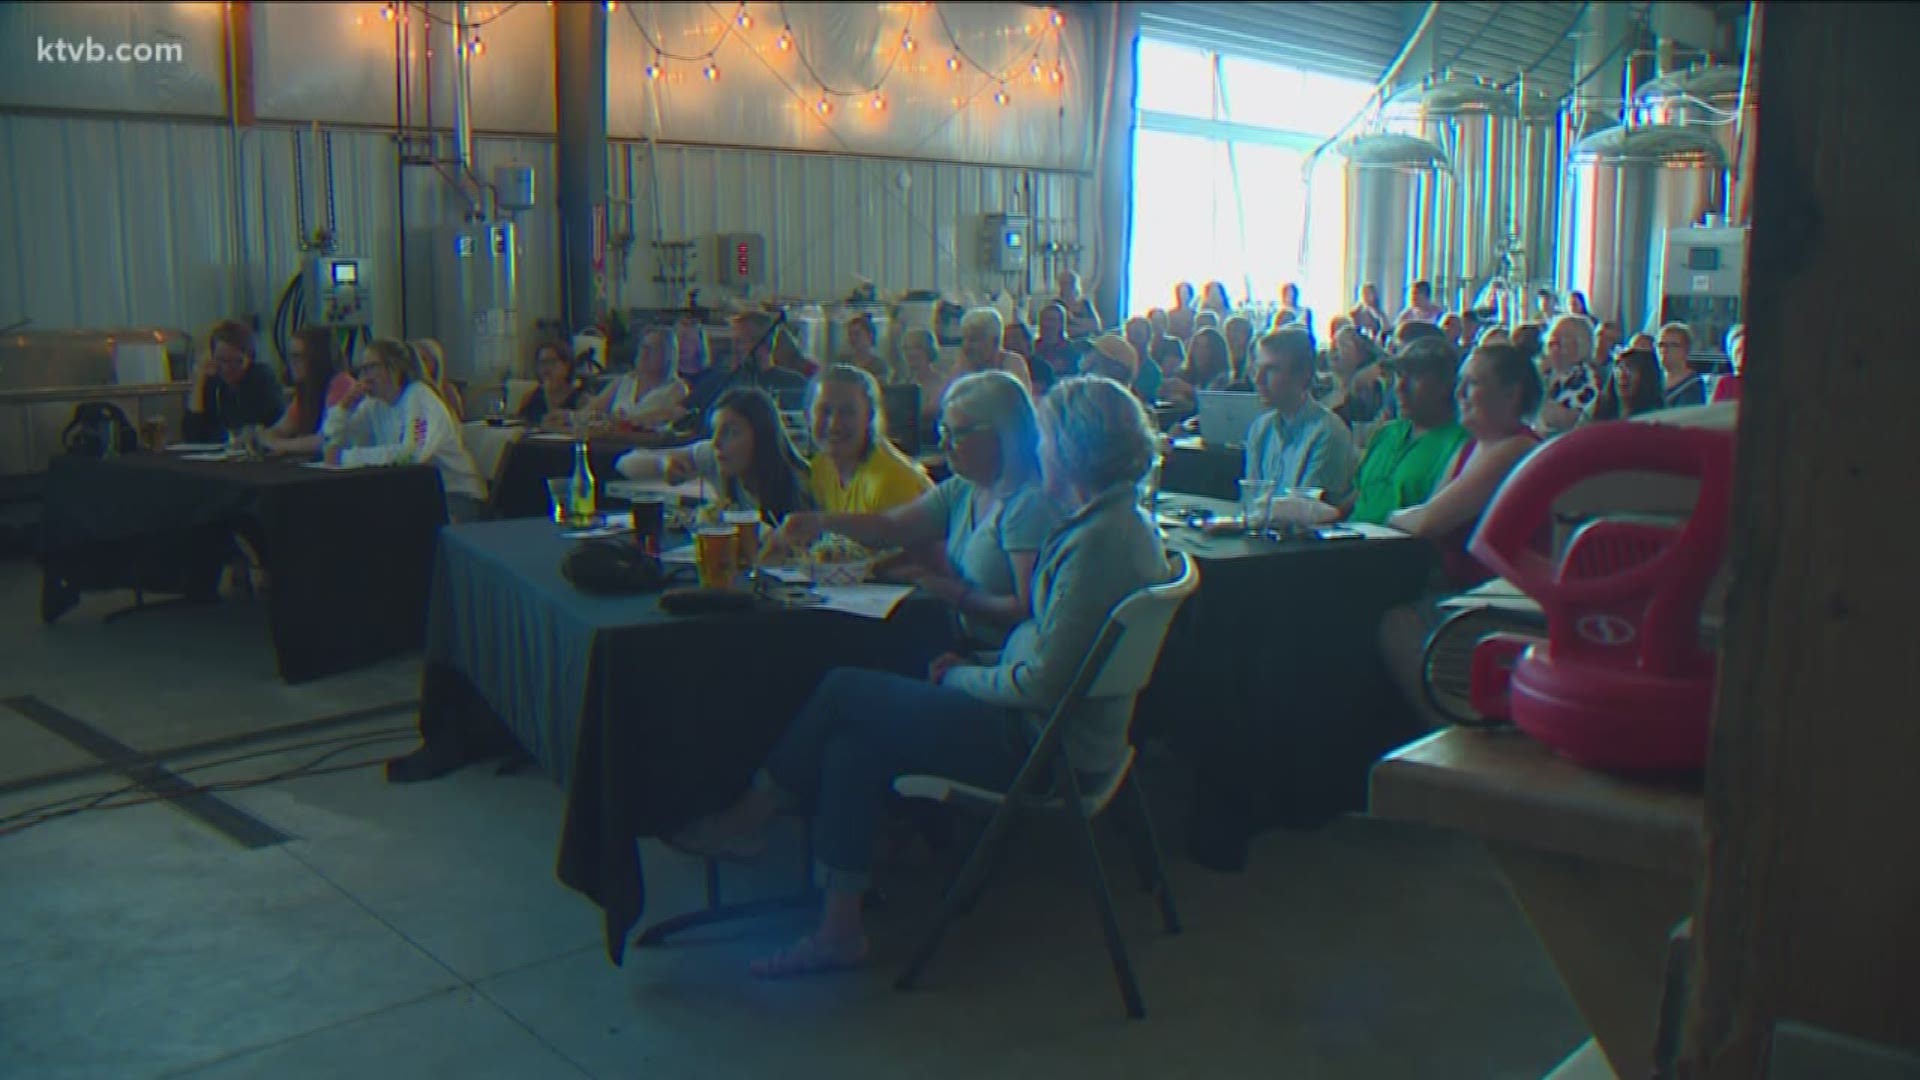 The Idaho Democratic Party held watch parties for both presidential debates this week.